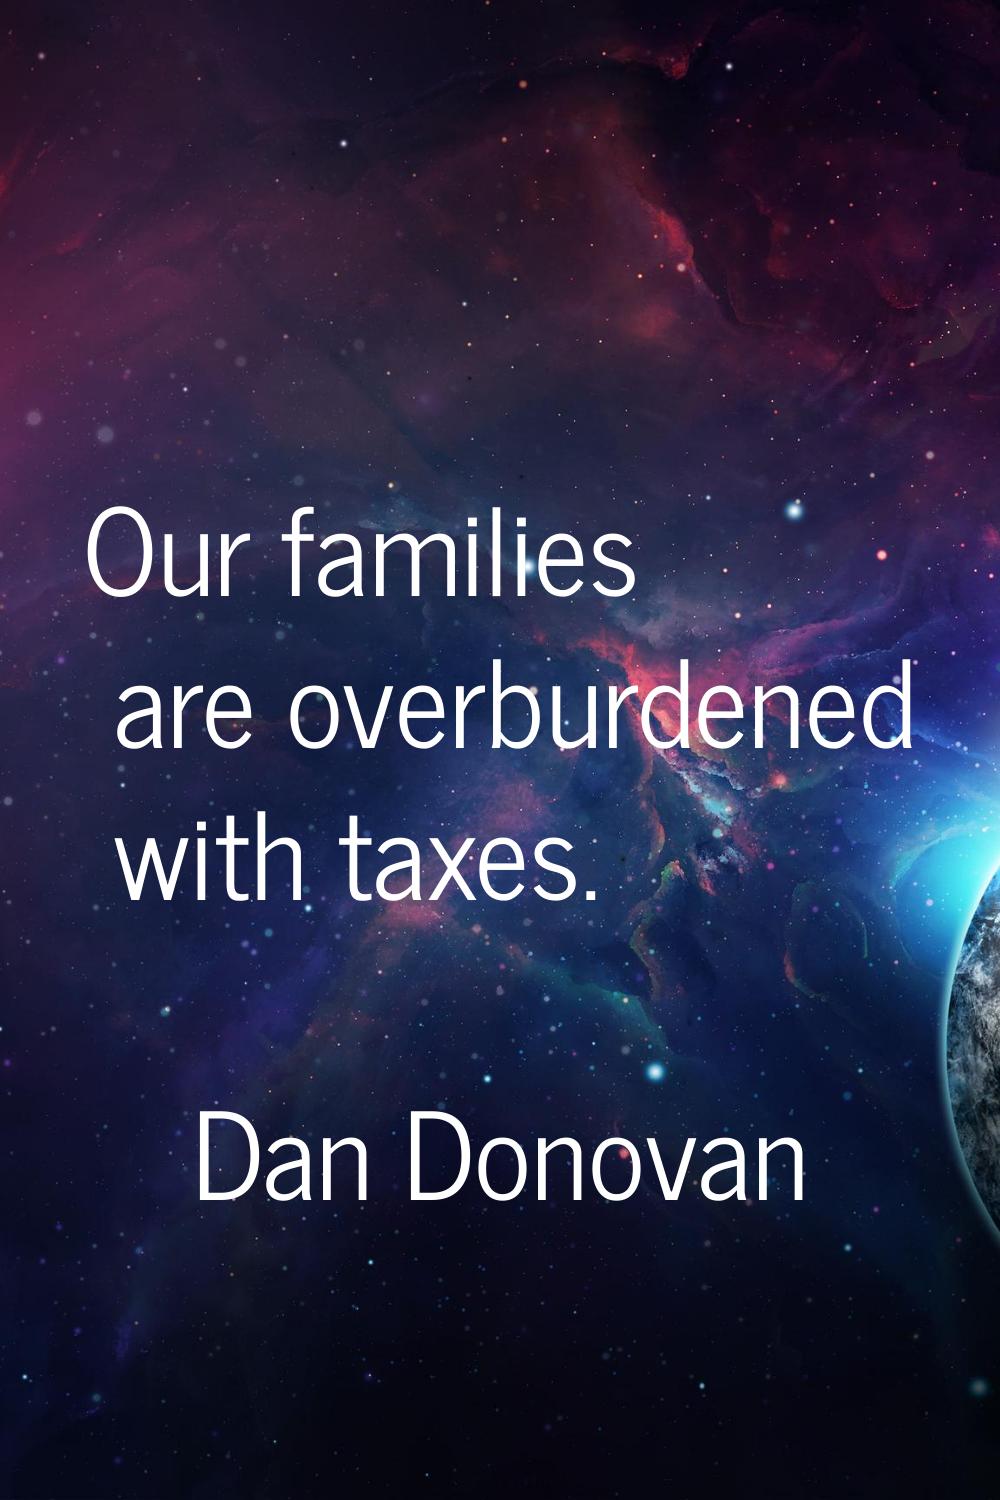 Our families are overburdened with taxes.